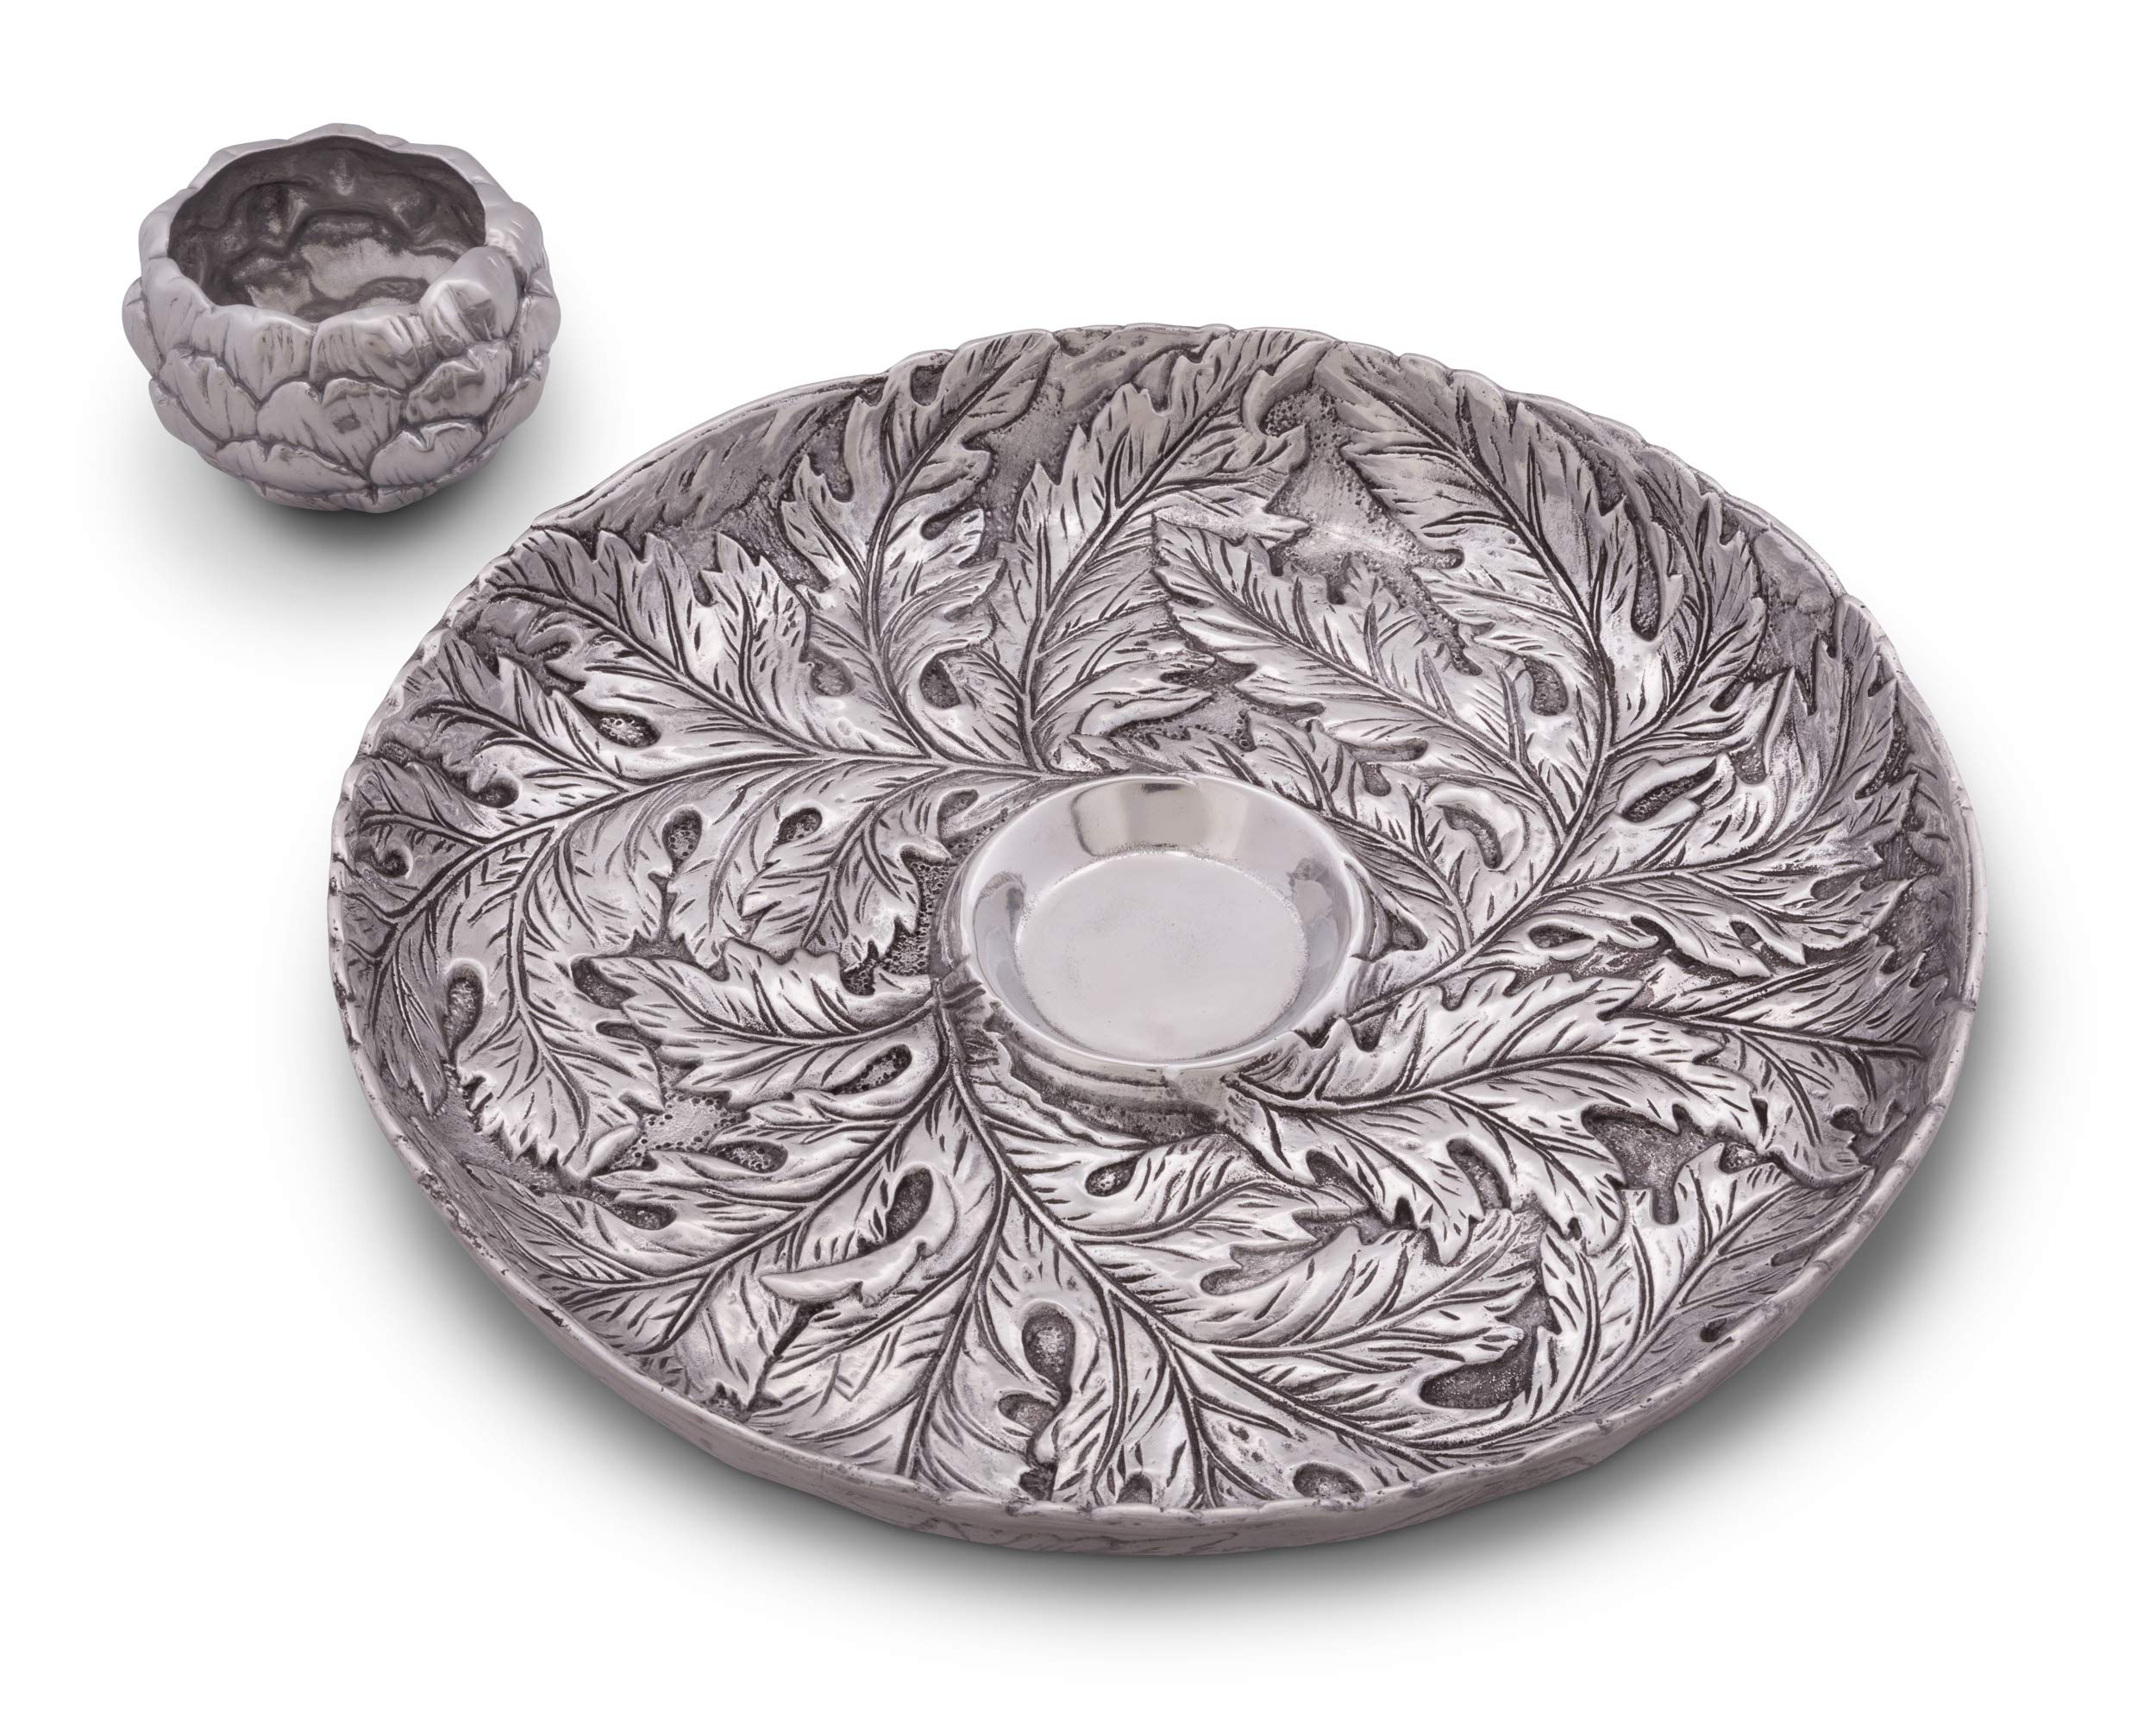 Arthur Court Designs Metal Chip and Dip Platter in Artichoke Pattern Sand Casted in Aluminum with Artisan Quality Hand Polished Designer Tarnish-Free 14.5 inch Diameter